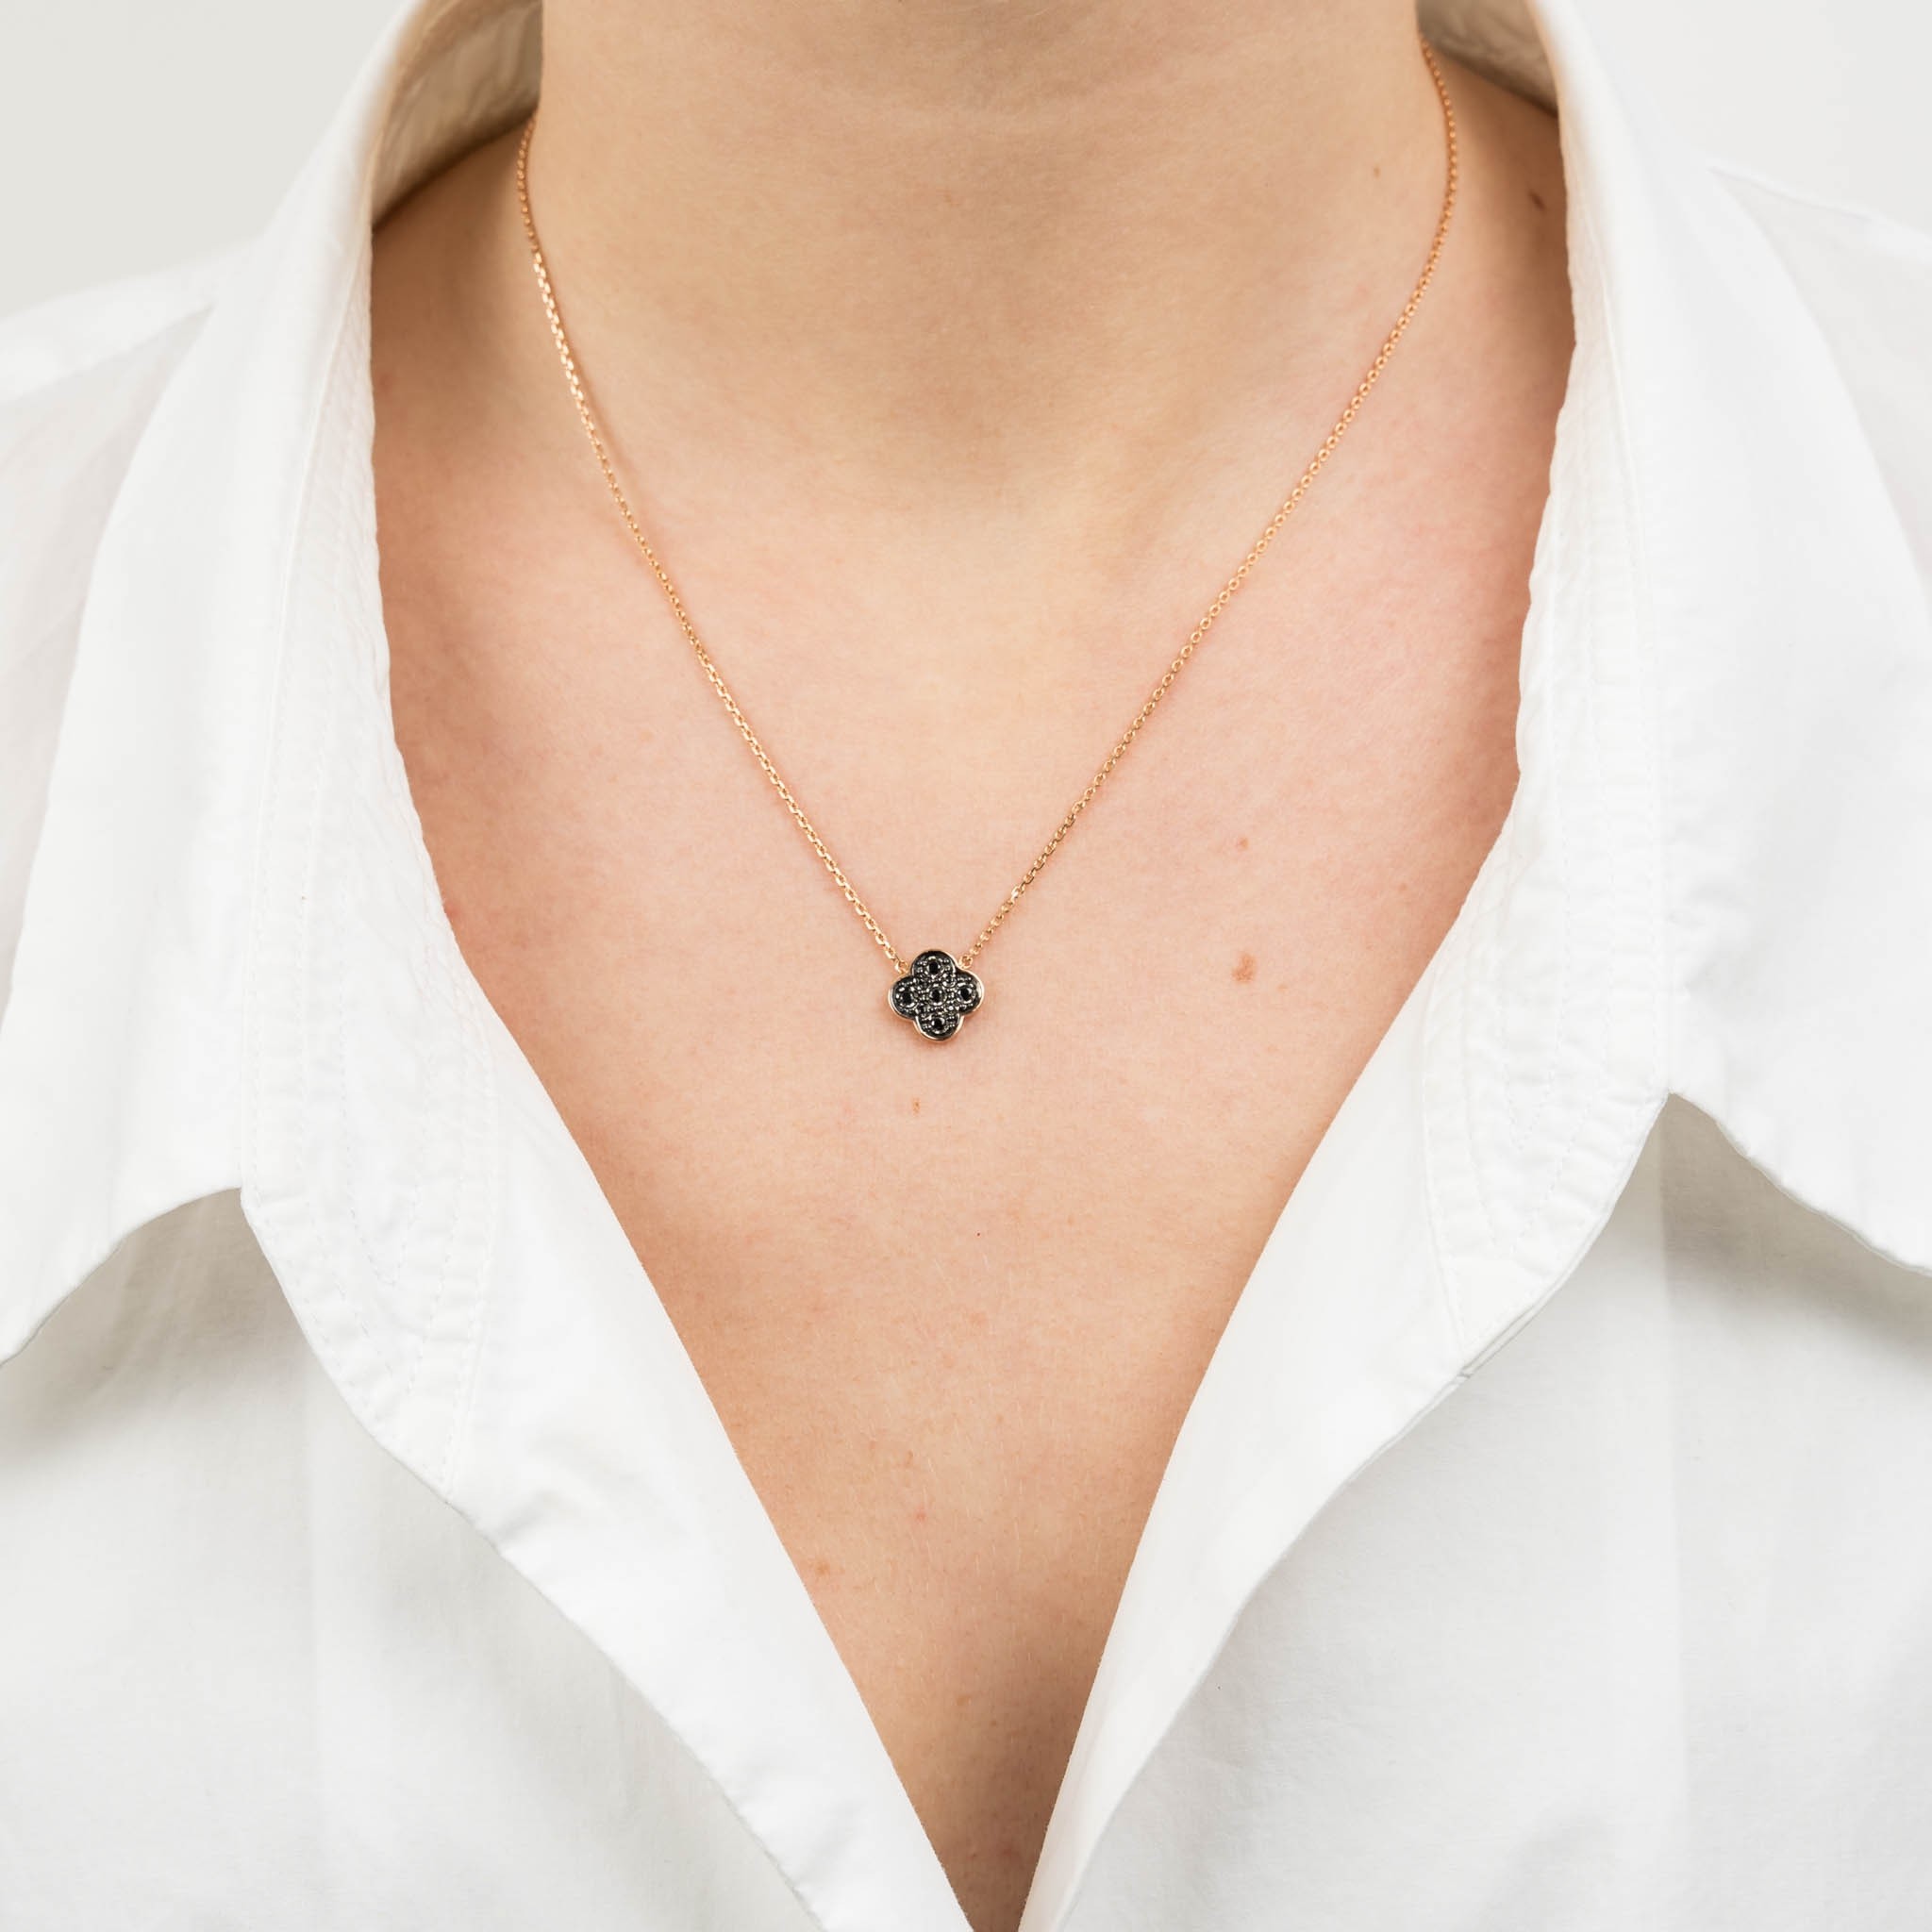 Half Bloom Diamond Necklace with Black Beads in 18KT Rose Gold